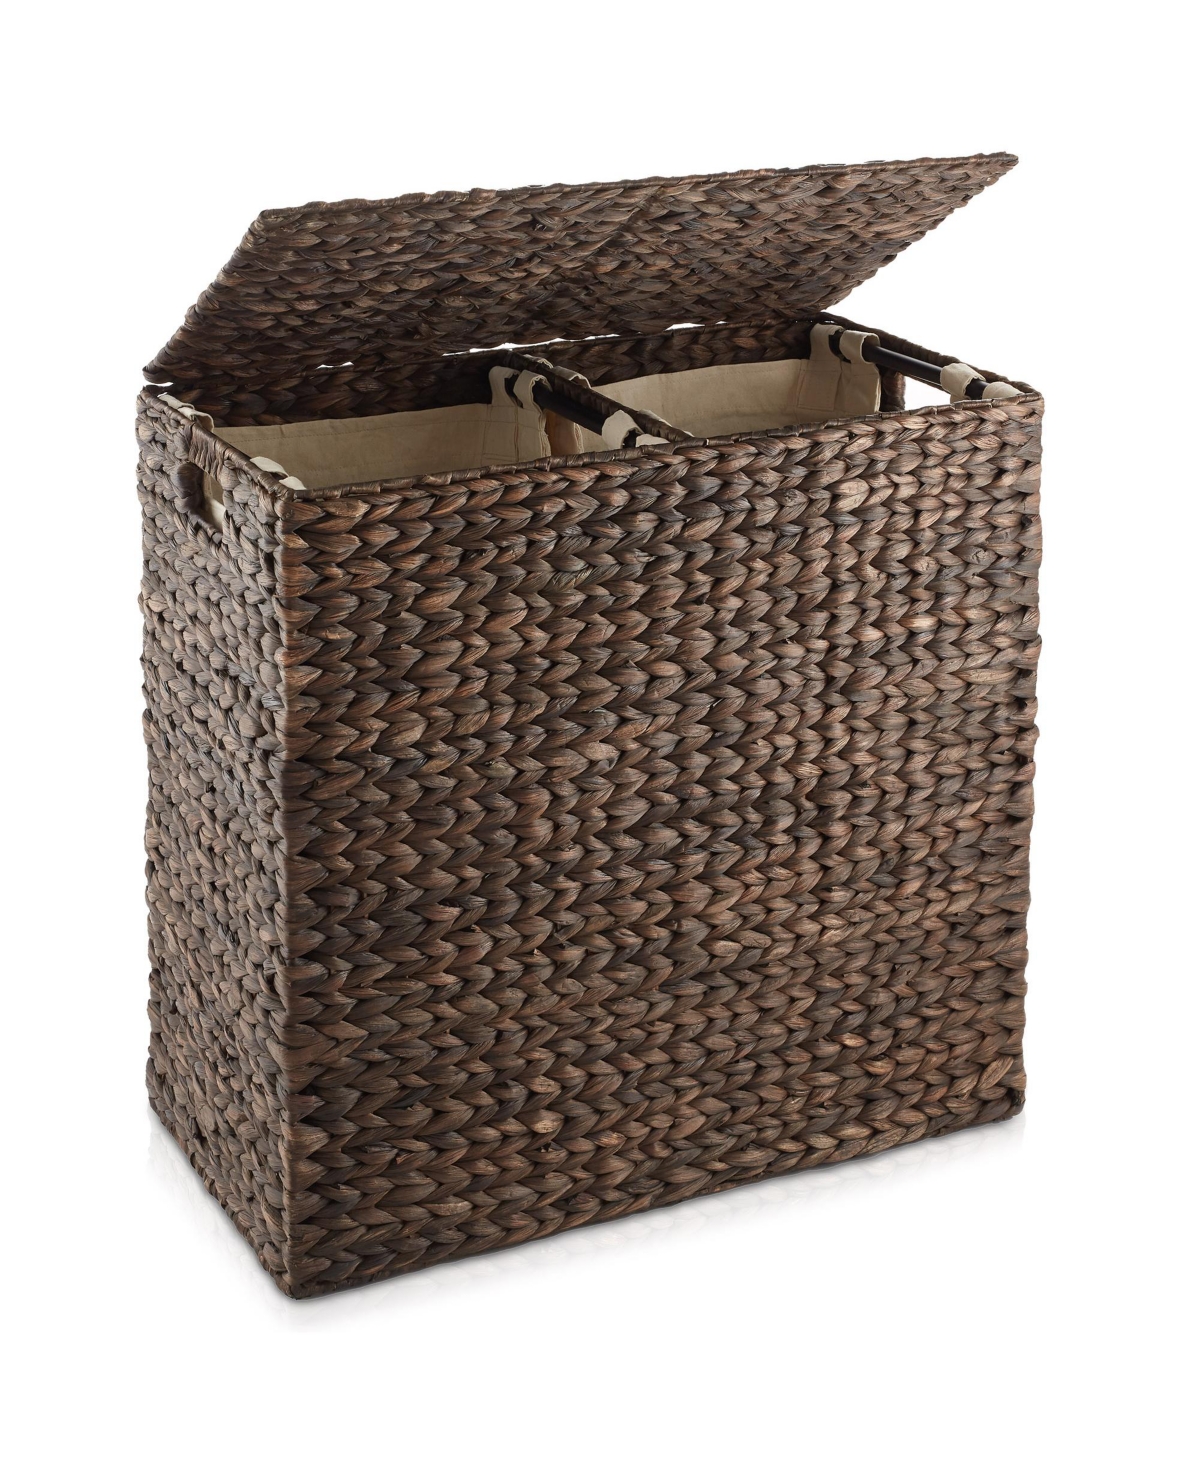 2-Section Laundry Hamper with Lid and Removable Liner Bags - Natural, Woven Water Hyacinth Laundry Basket for Clothes - Espresso